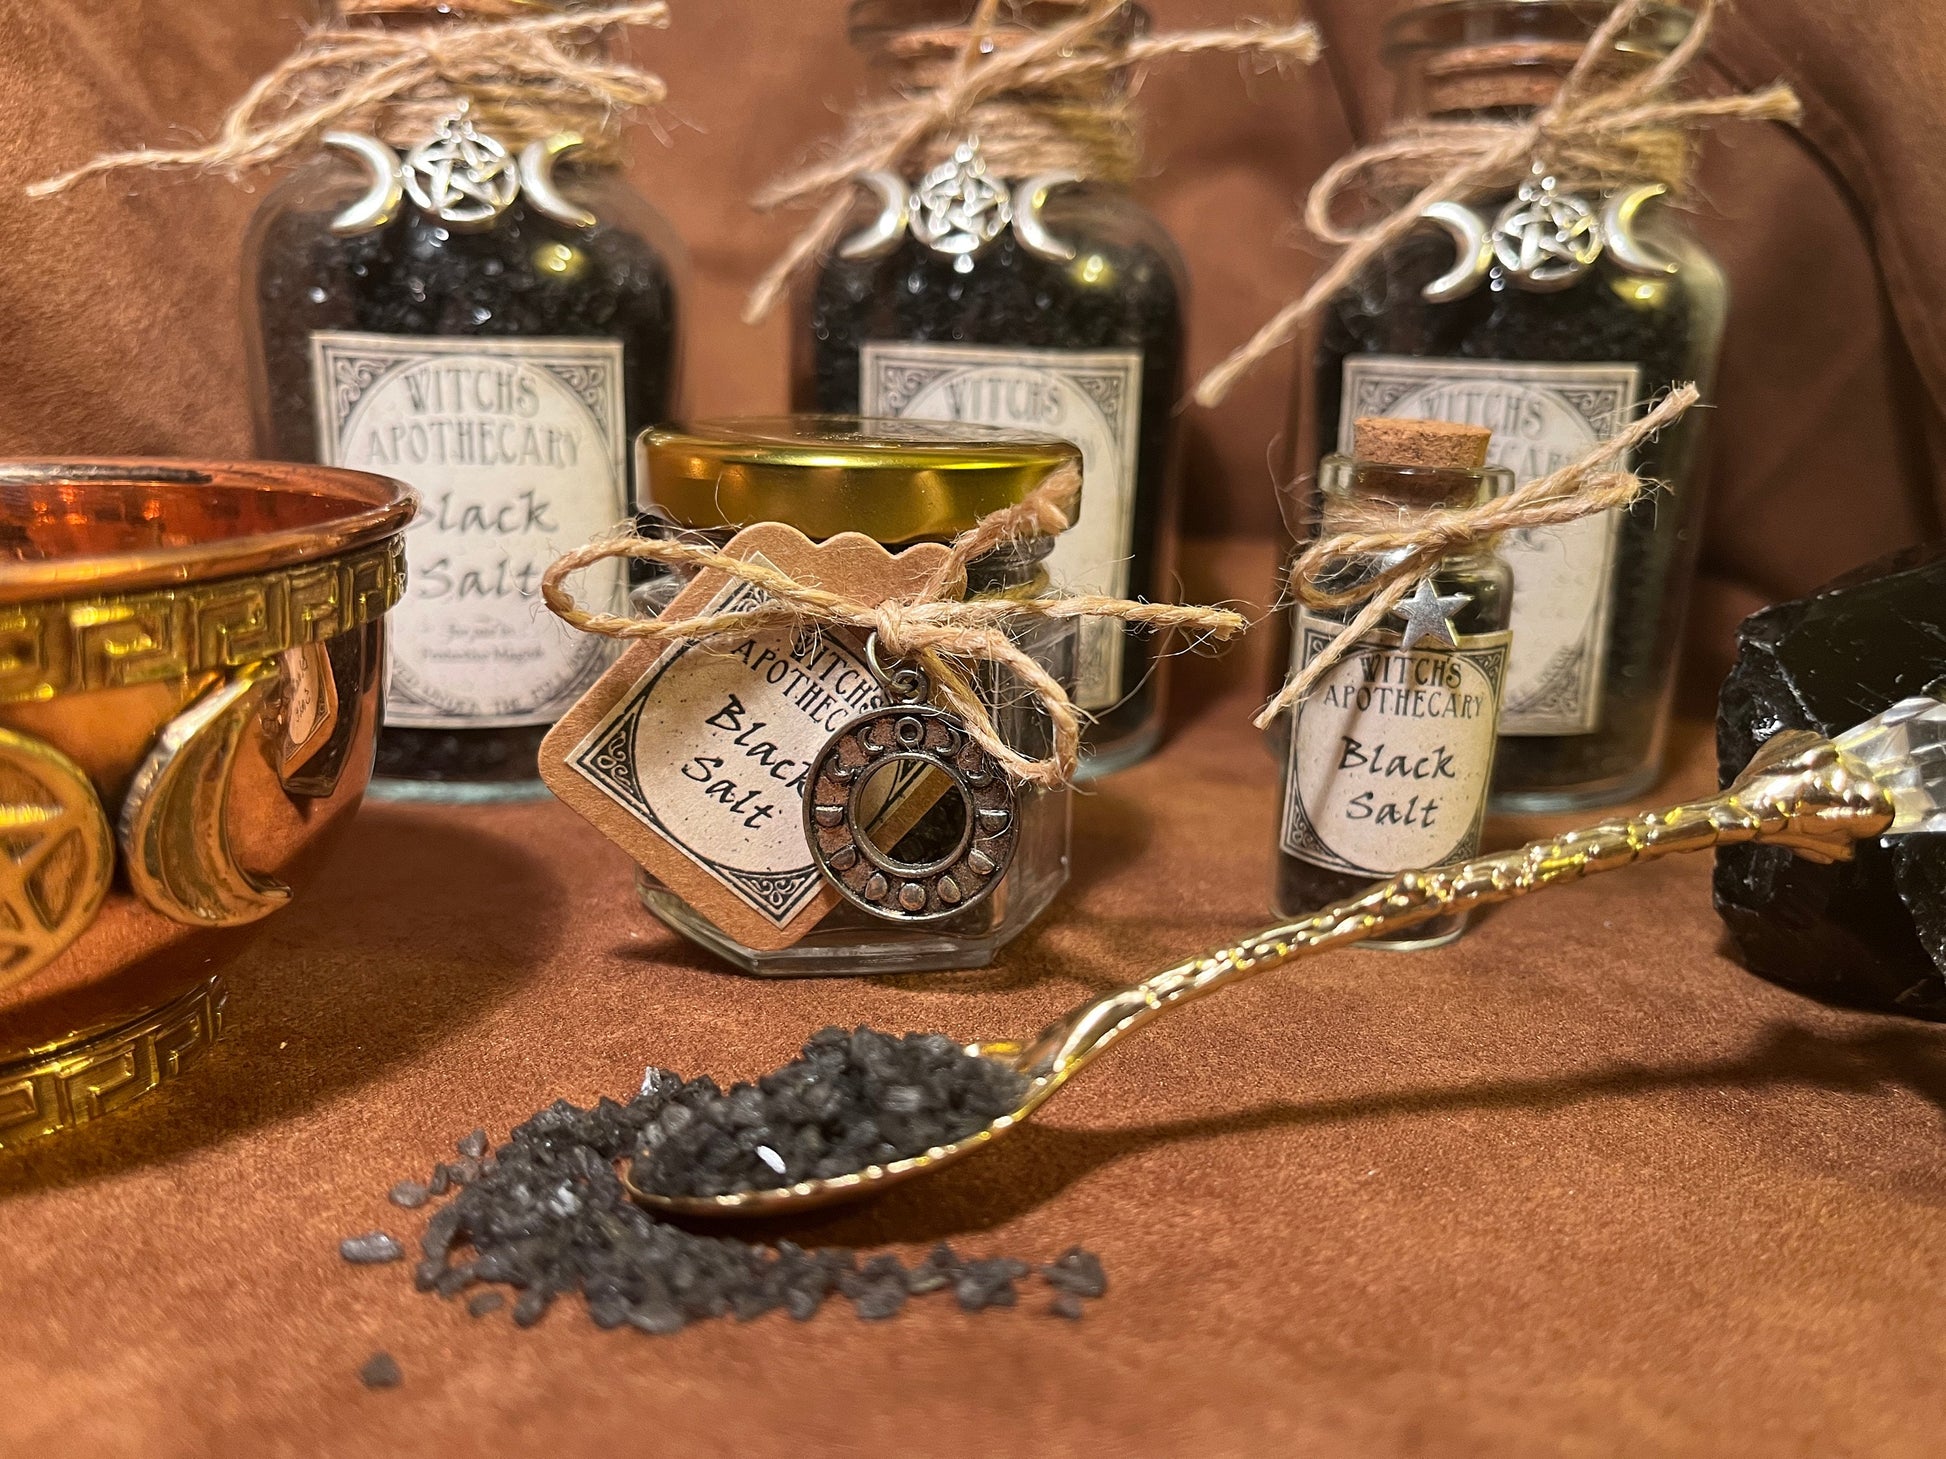 Black Salt ~ Witchcraft Protection ~ Magickal Salt ~ Banishing ~ Witchcraft Altar Supplies and Tools